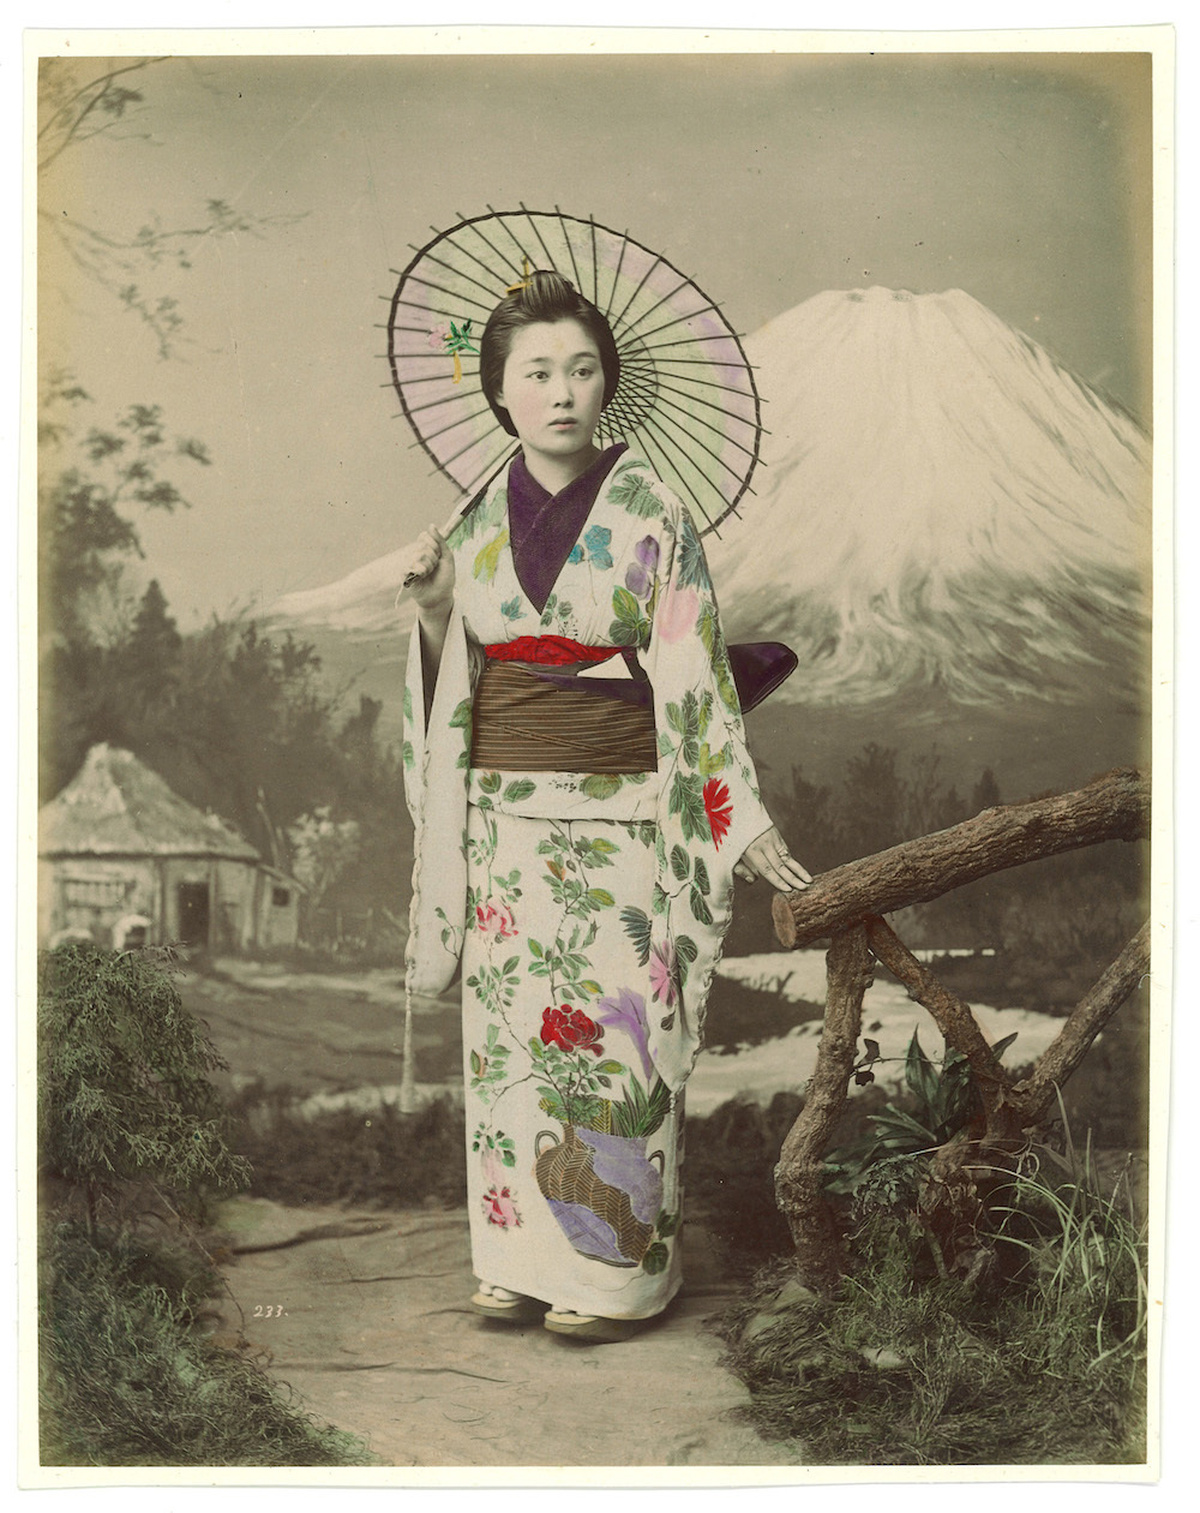 A woman in traditional Japanese attire posing for a photograph with Mount Fuji and a hut in the background.